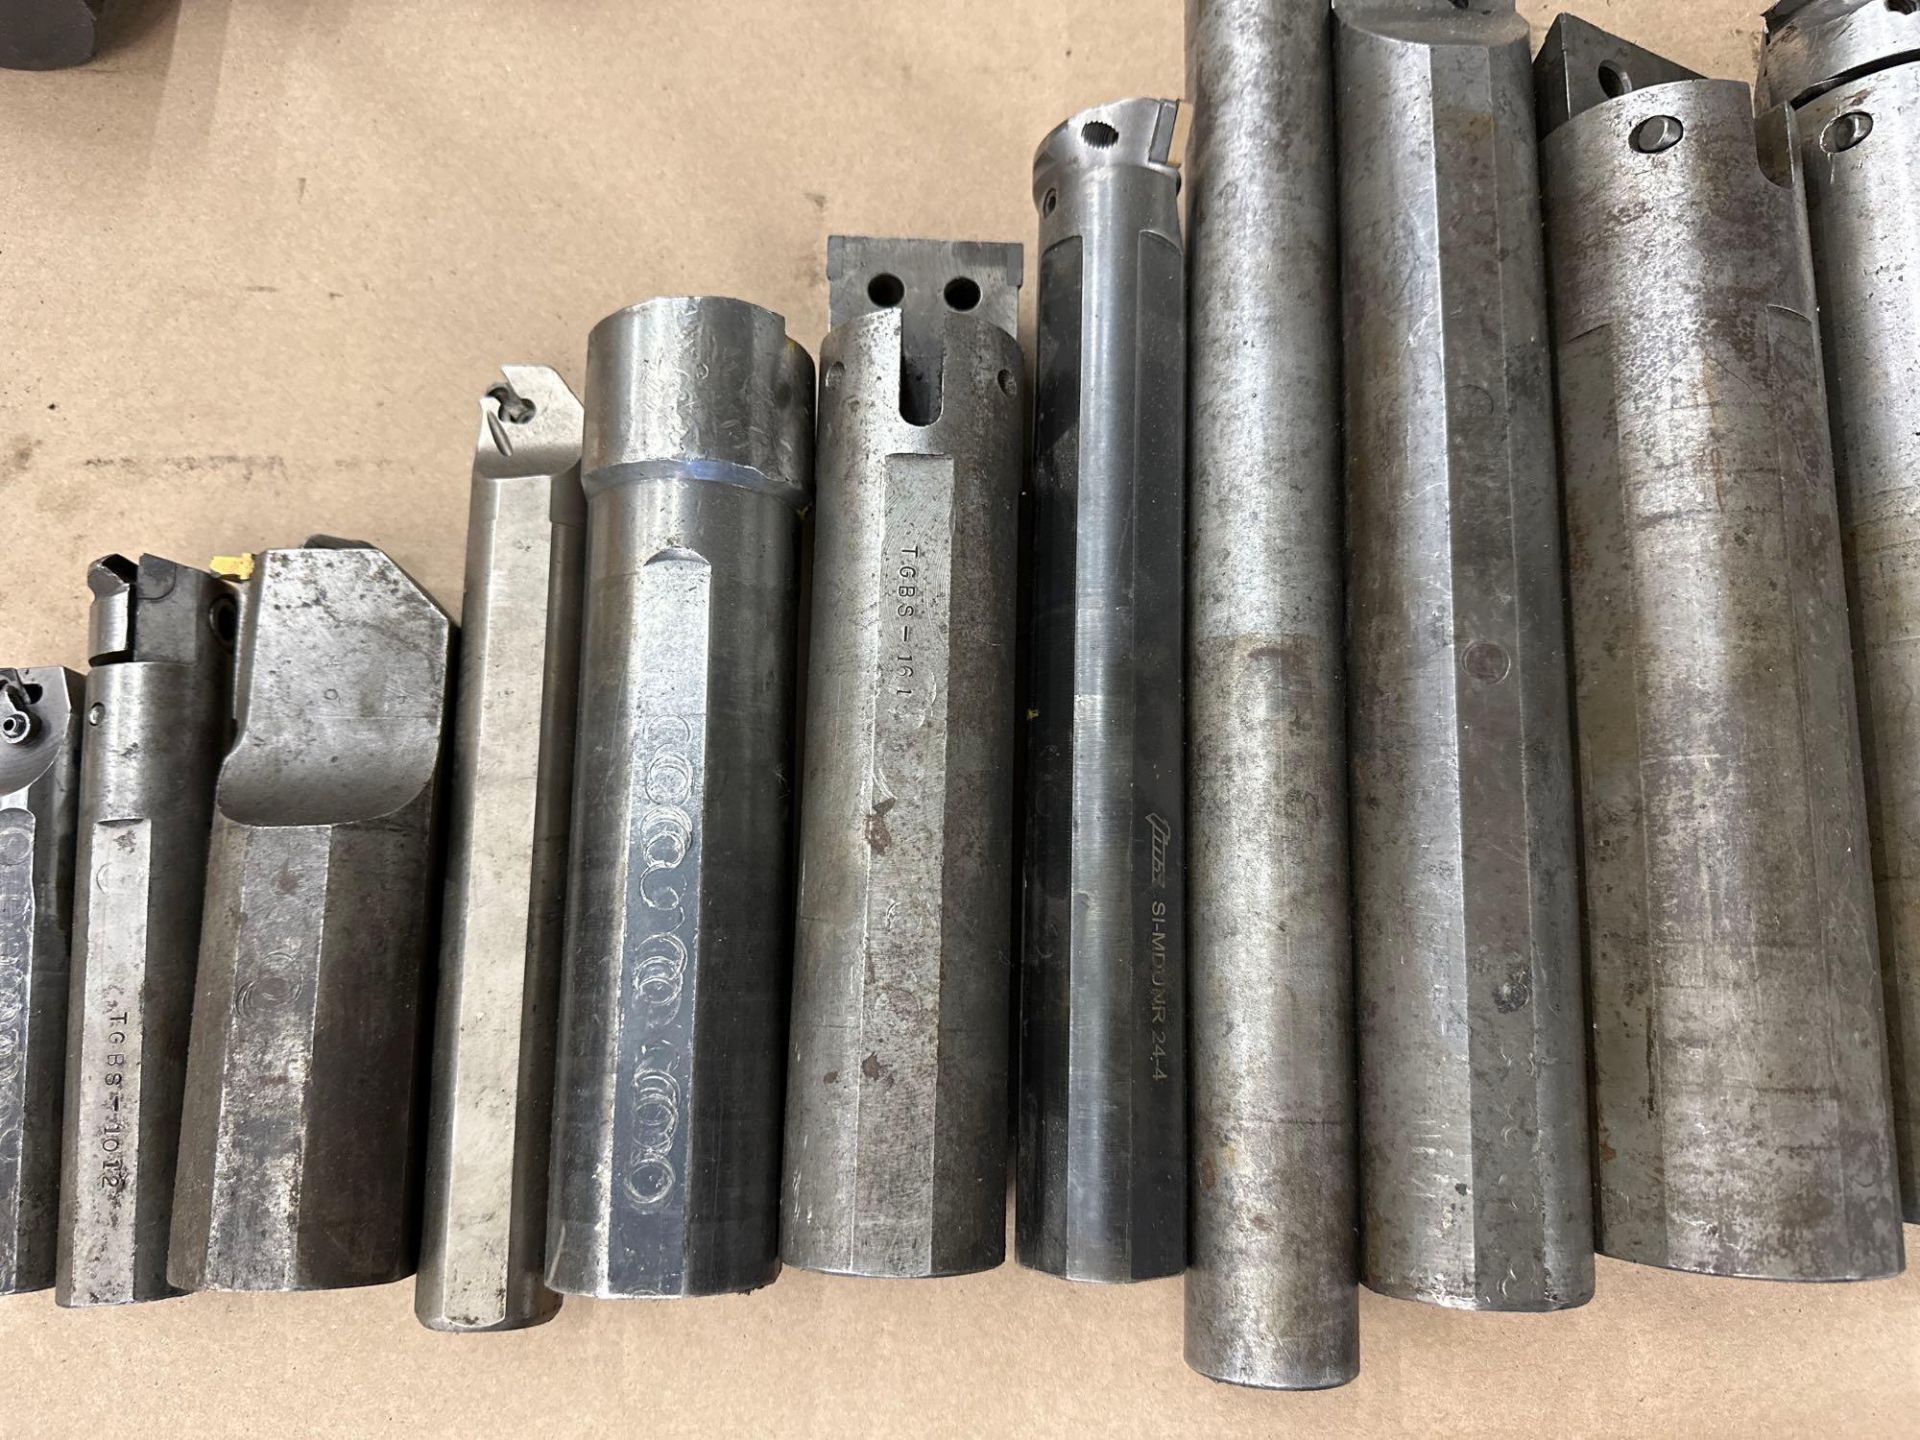 Lot of 10 Assorted Indexable Boring Bars Ranging From: 1” X 5 1/2” To 2 1/2” X 19 3/4” - Image 4 of 6